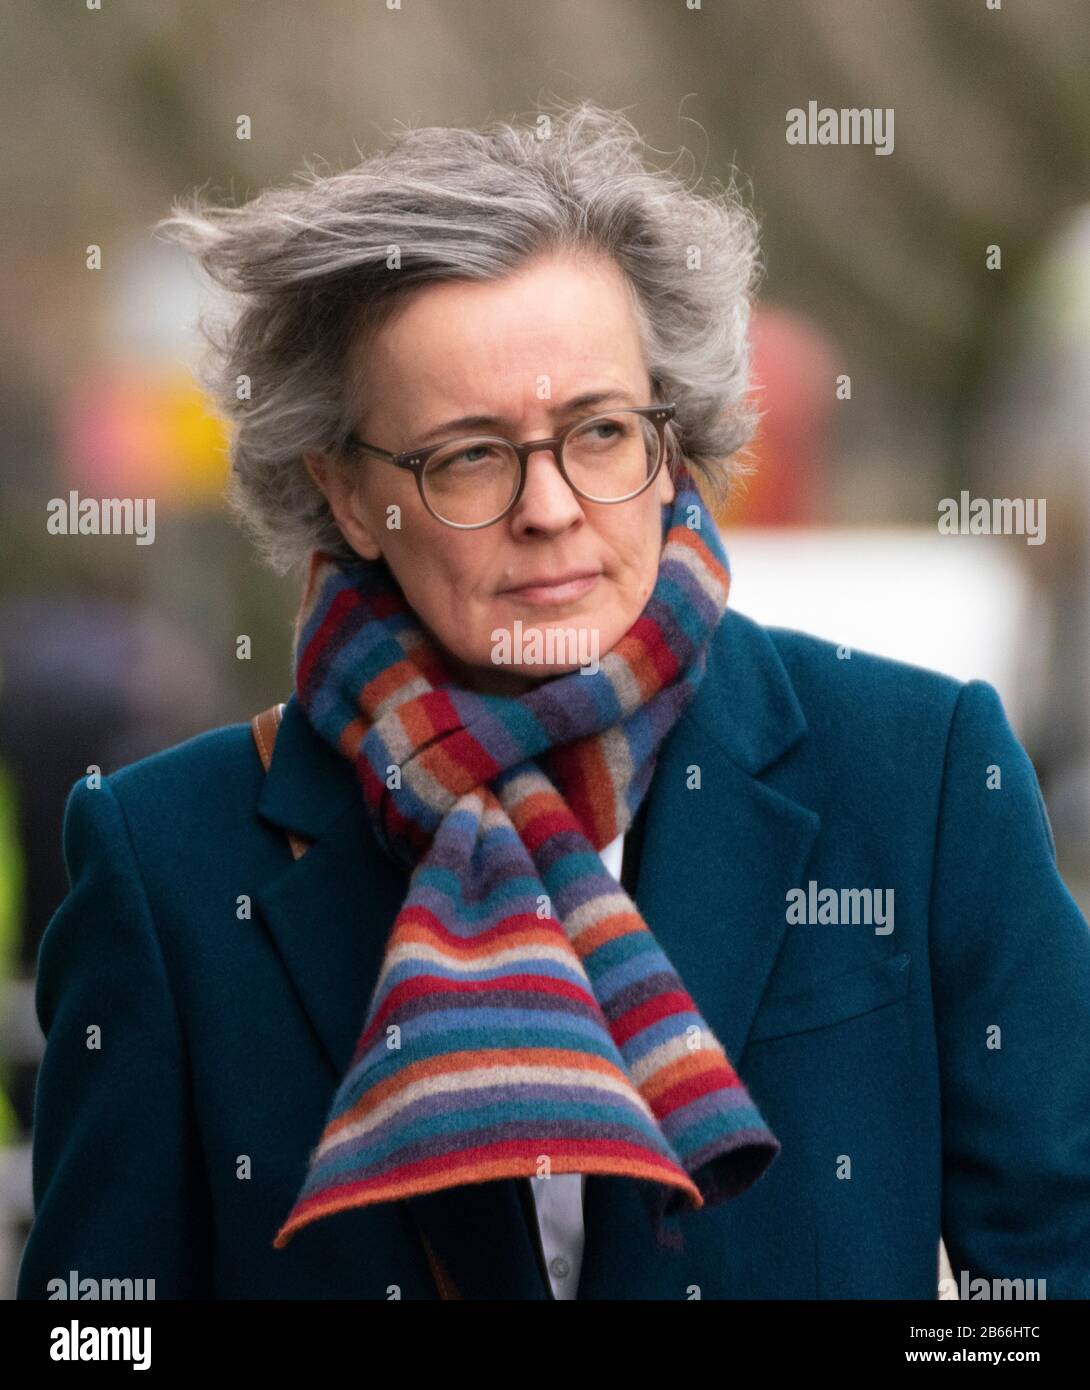 Edinburgh, Scotland, UK. 10 March, 2020.  Alex Salmond trial in  High Court in Edinburgh second day of his trial. Pictured; Shelagh Mccall QC.  arrives at court. She is Gordon JacksonÕs deputy during the trial.QC Iain Masterton/Alamy Live News Stock Photo